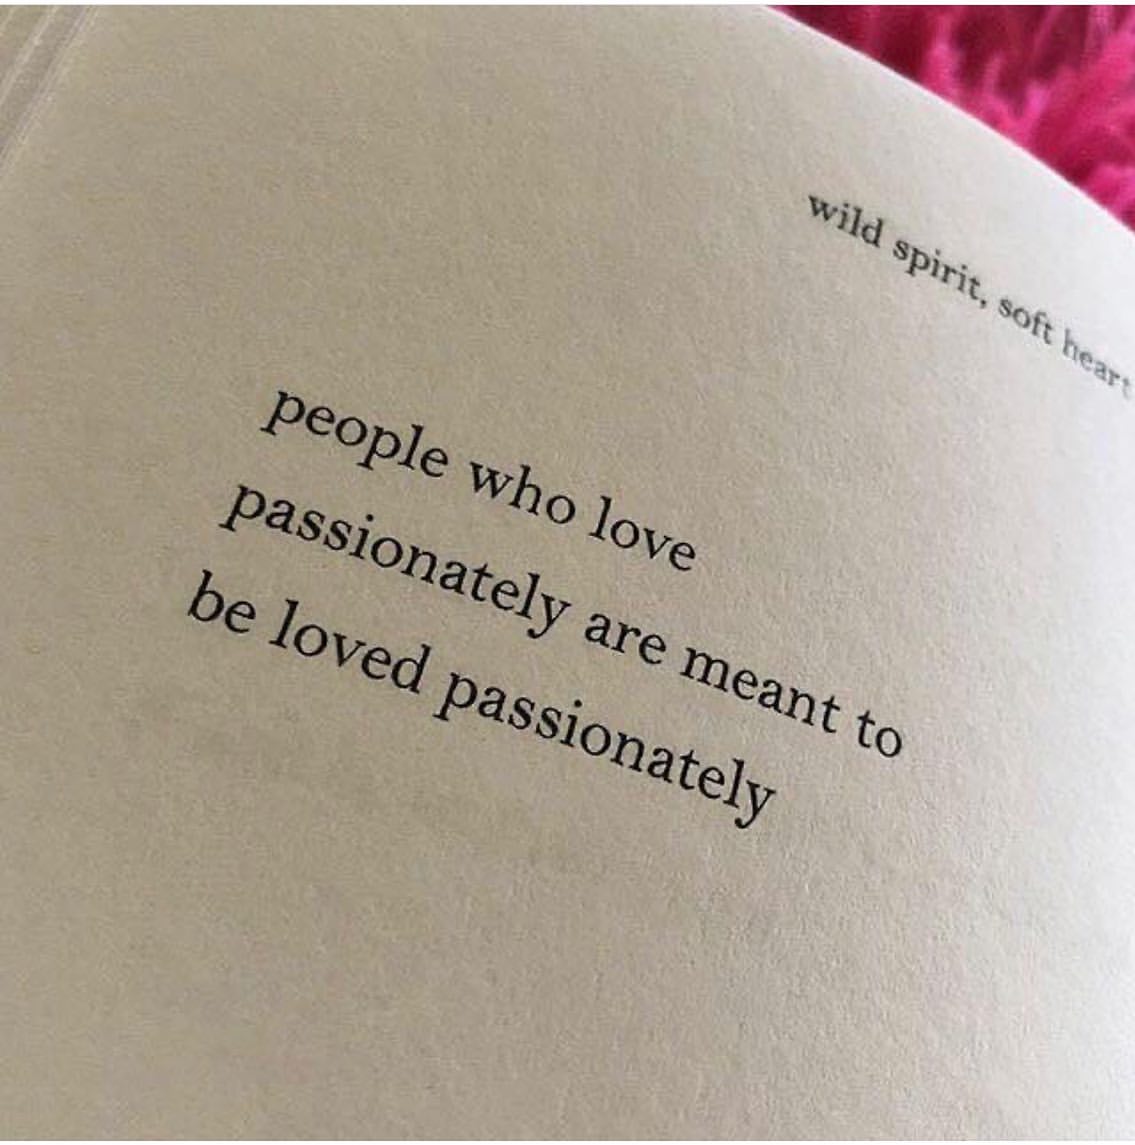 People who love passionately are meant to be loved passionately.